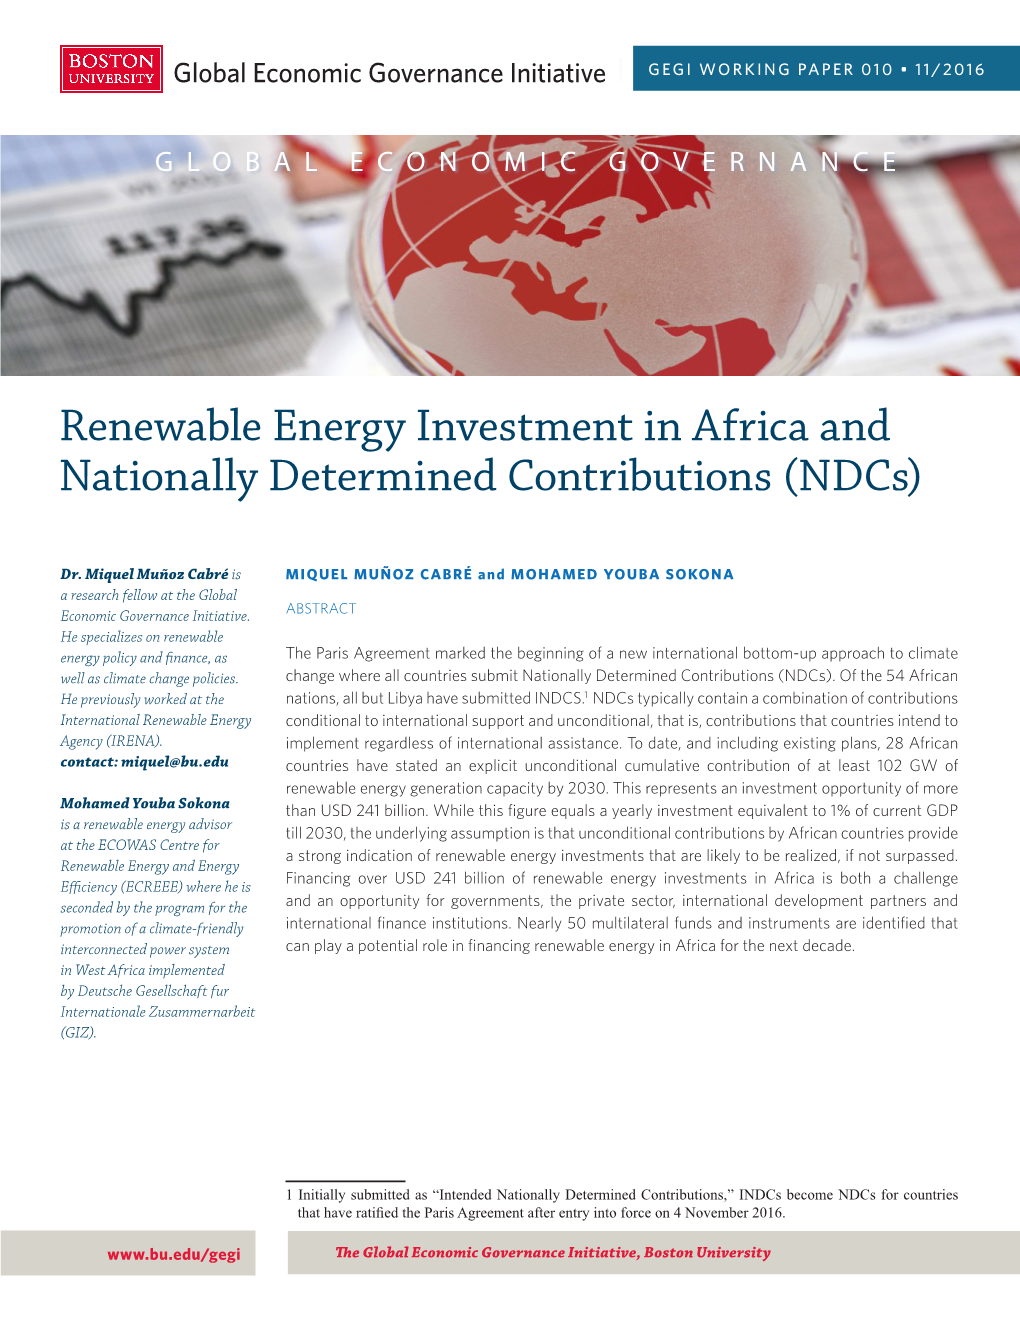 Renewable Energy Investment in Africa and Nationally Determined Contributions (Ndcs)